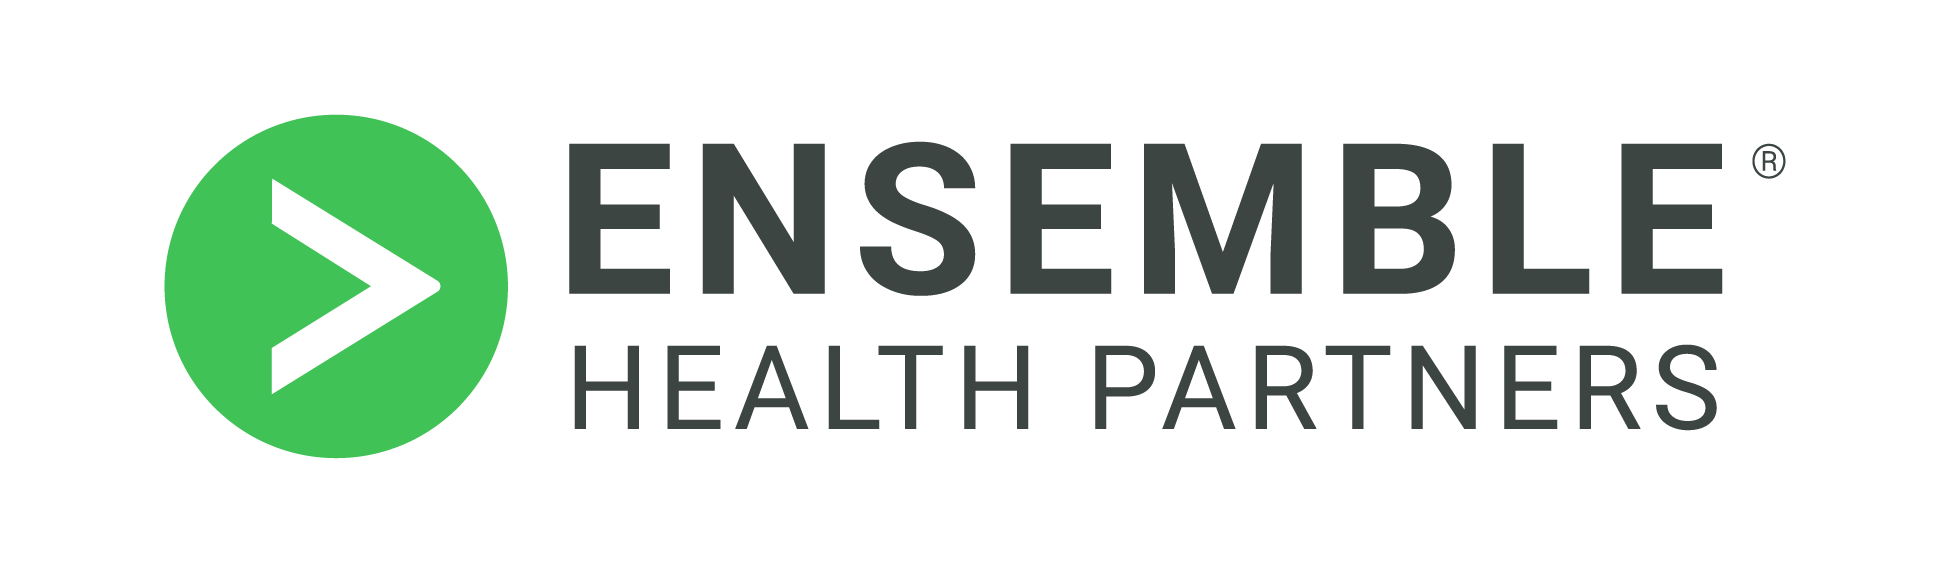 Ensemble Health Partners, Microsoft Strengthens AI-Powered Revenue Cycle Management with Expanded Partnership